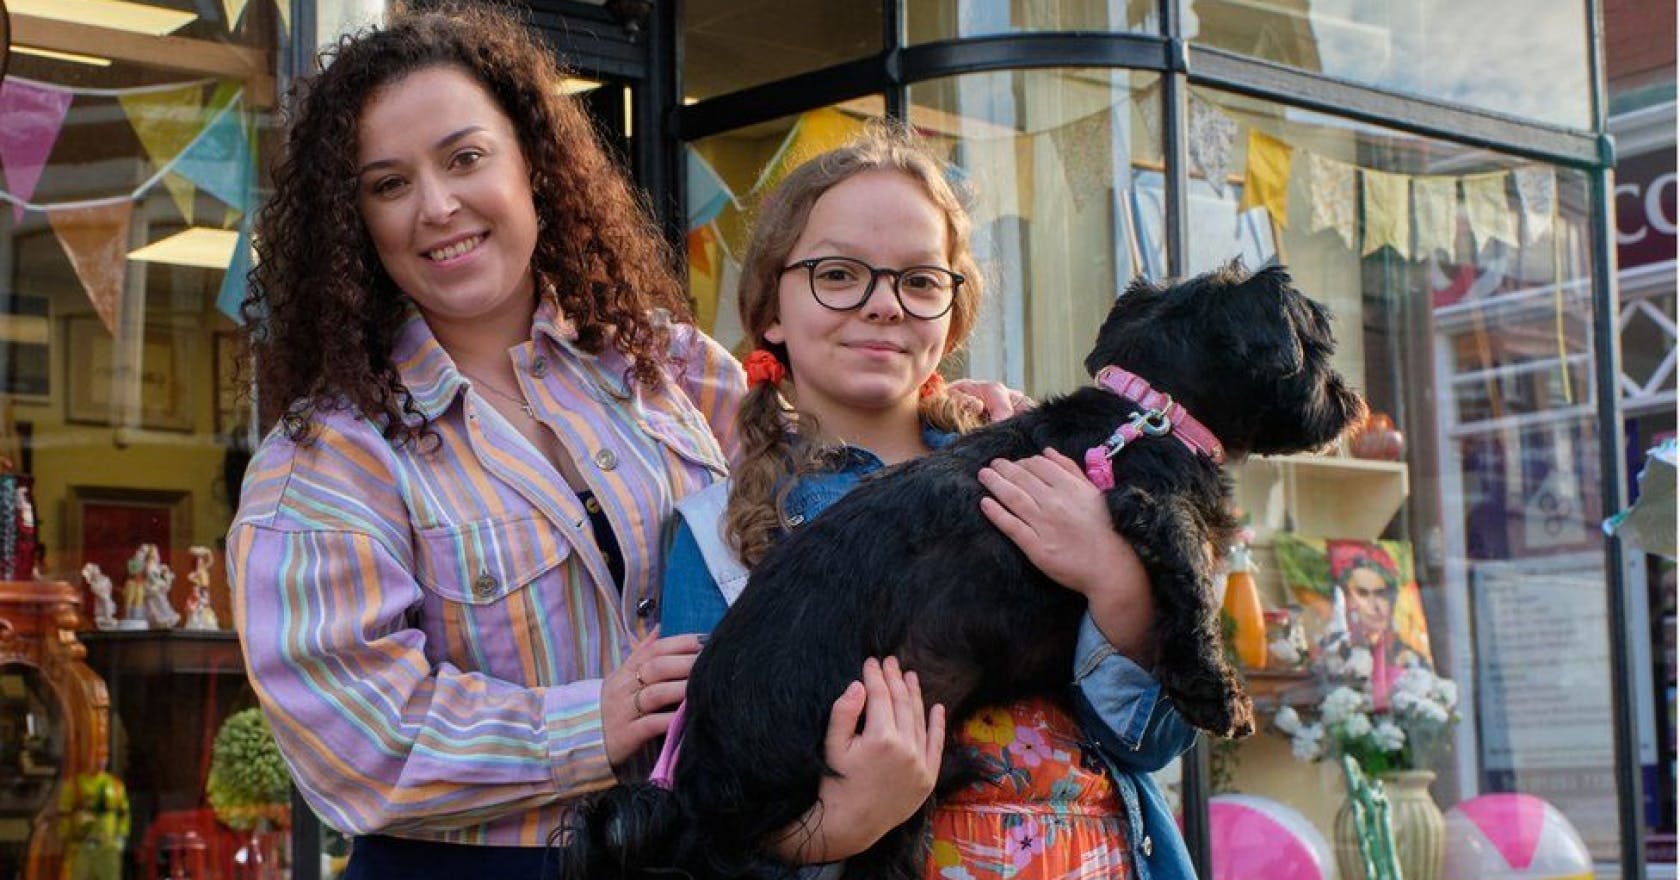 My Mum Tracy Beaker: why everyone is talking about the return of this children’s TV series